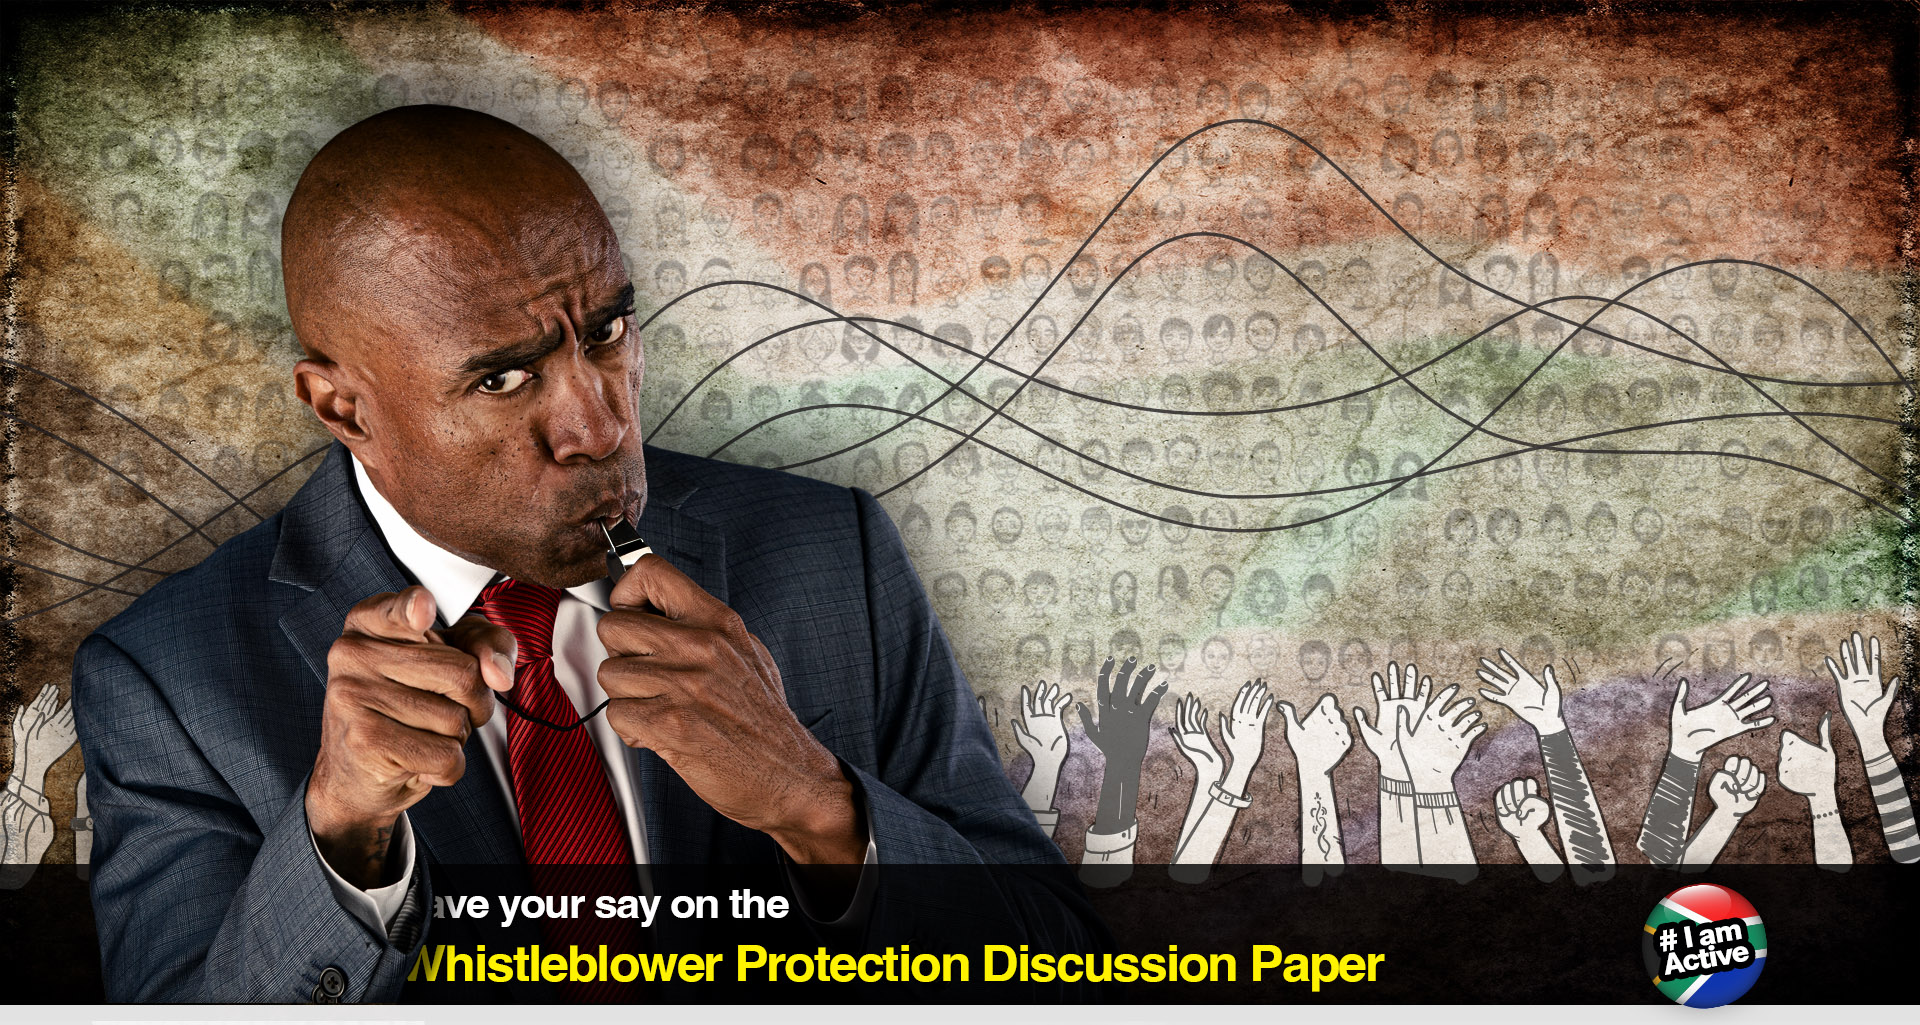 Have a say o the Whistleblower Protection discussion paper